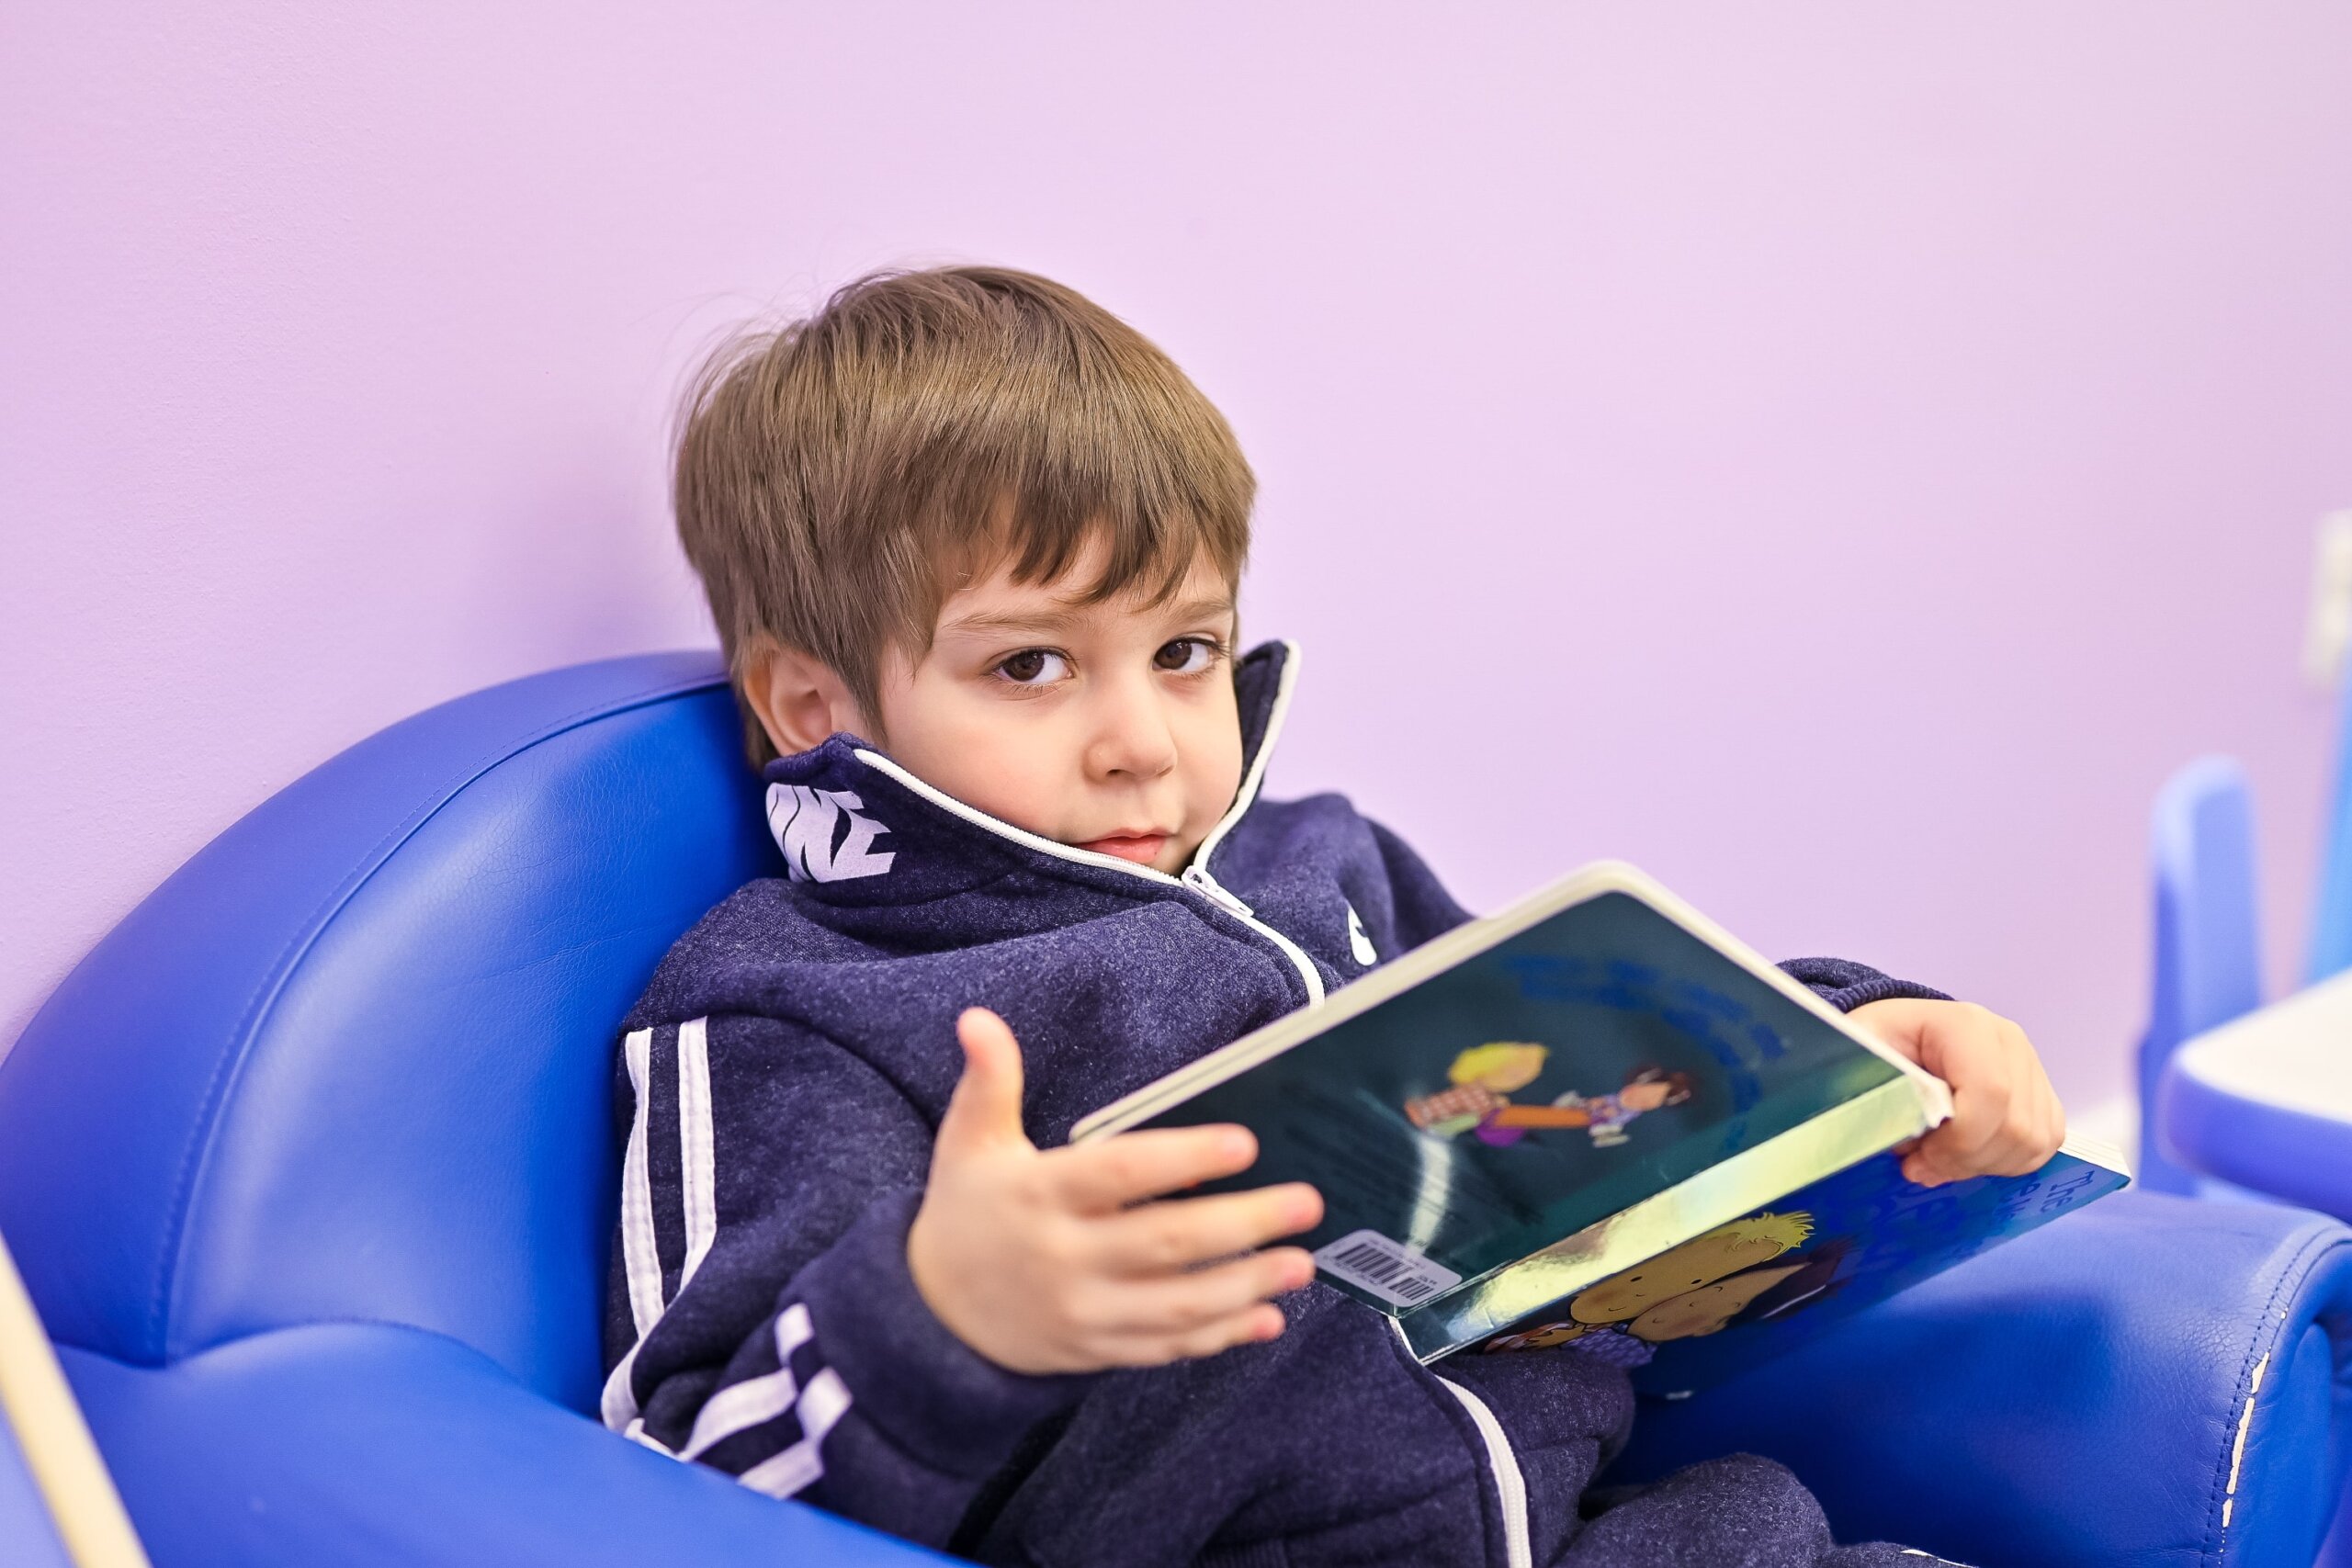 Young boy intently reading a colorful storybook in a daycare setting